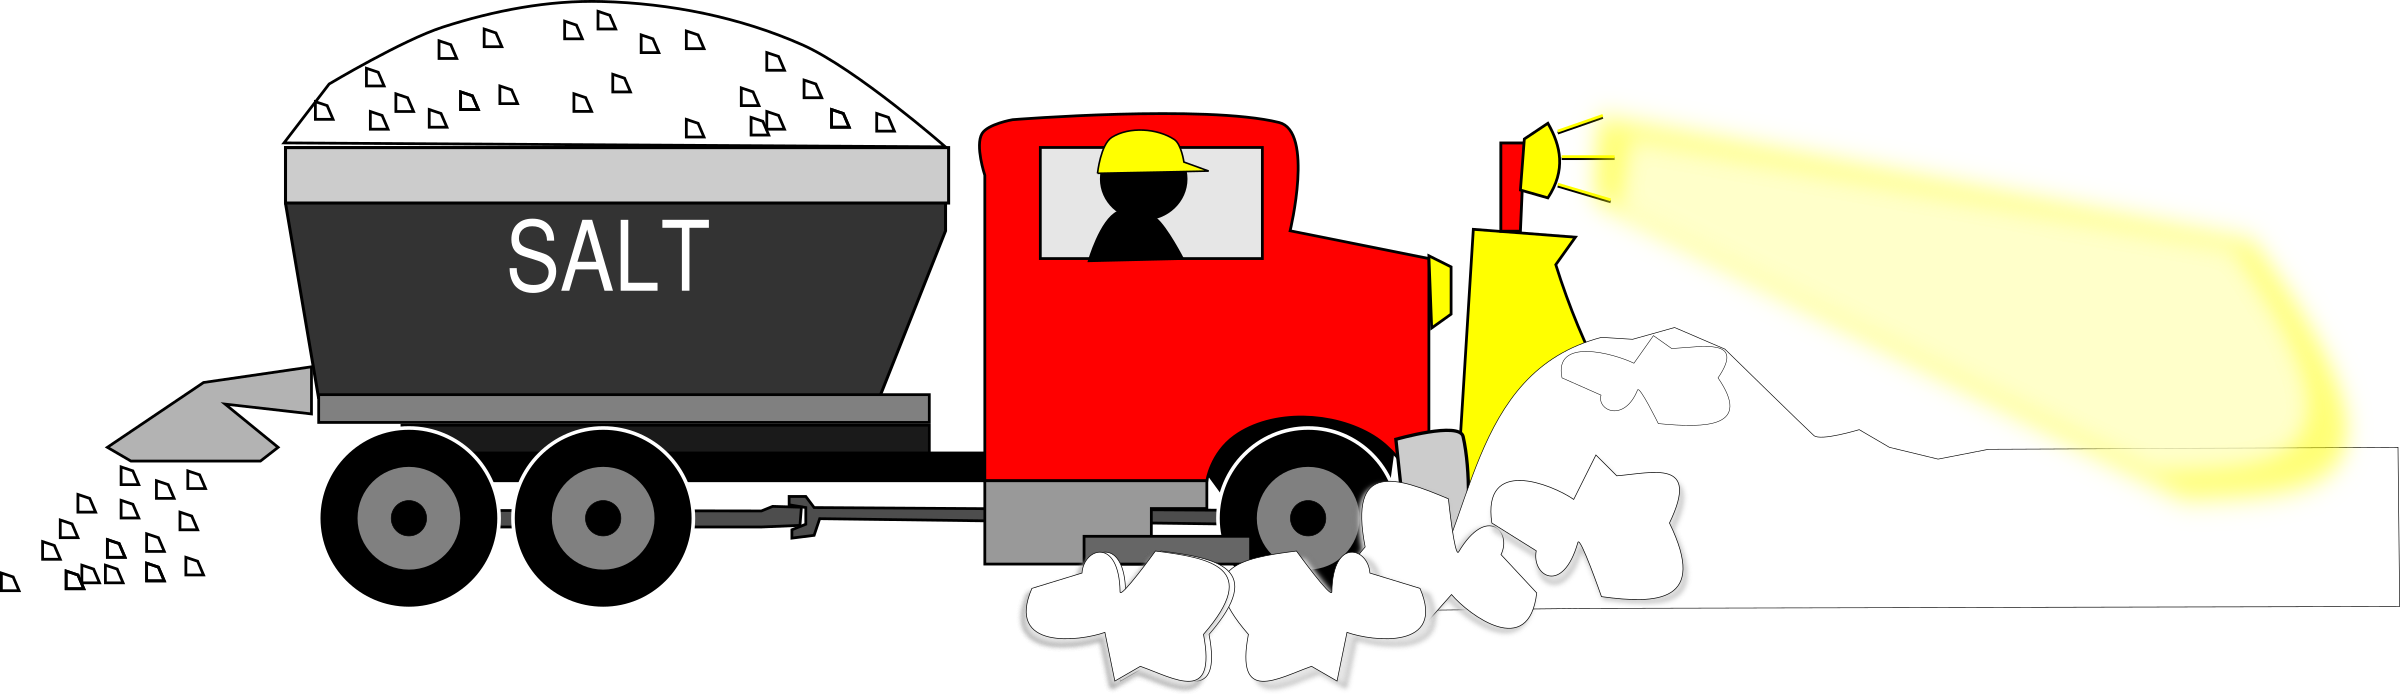 snow removal clipart - photo #14